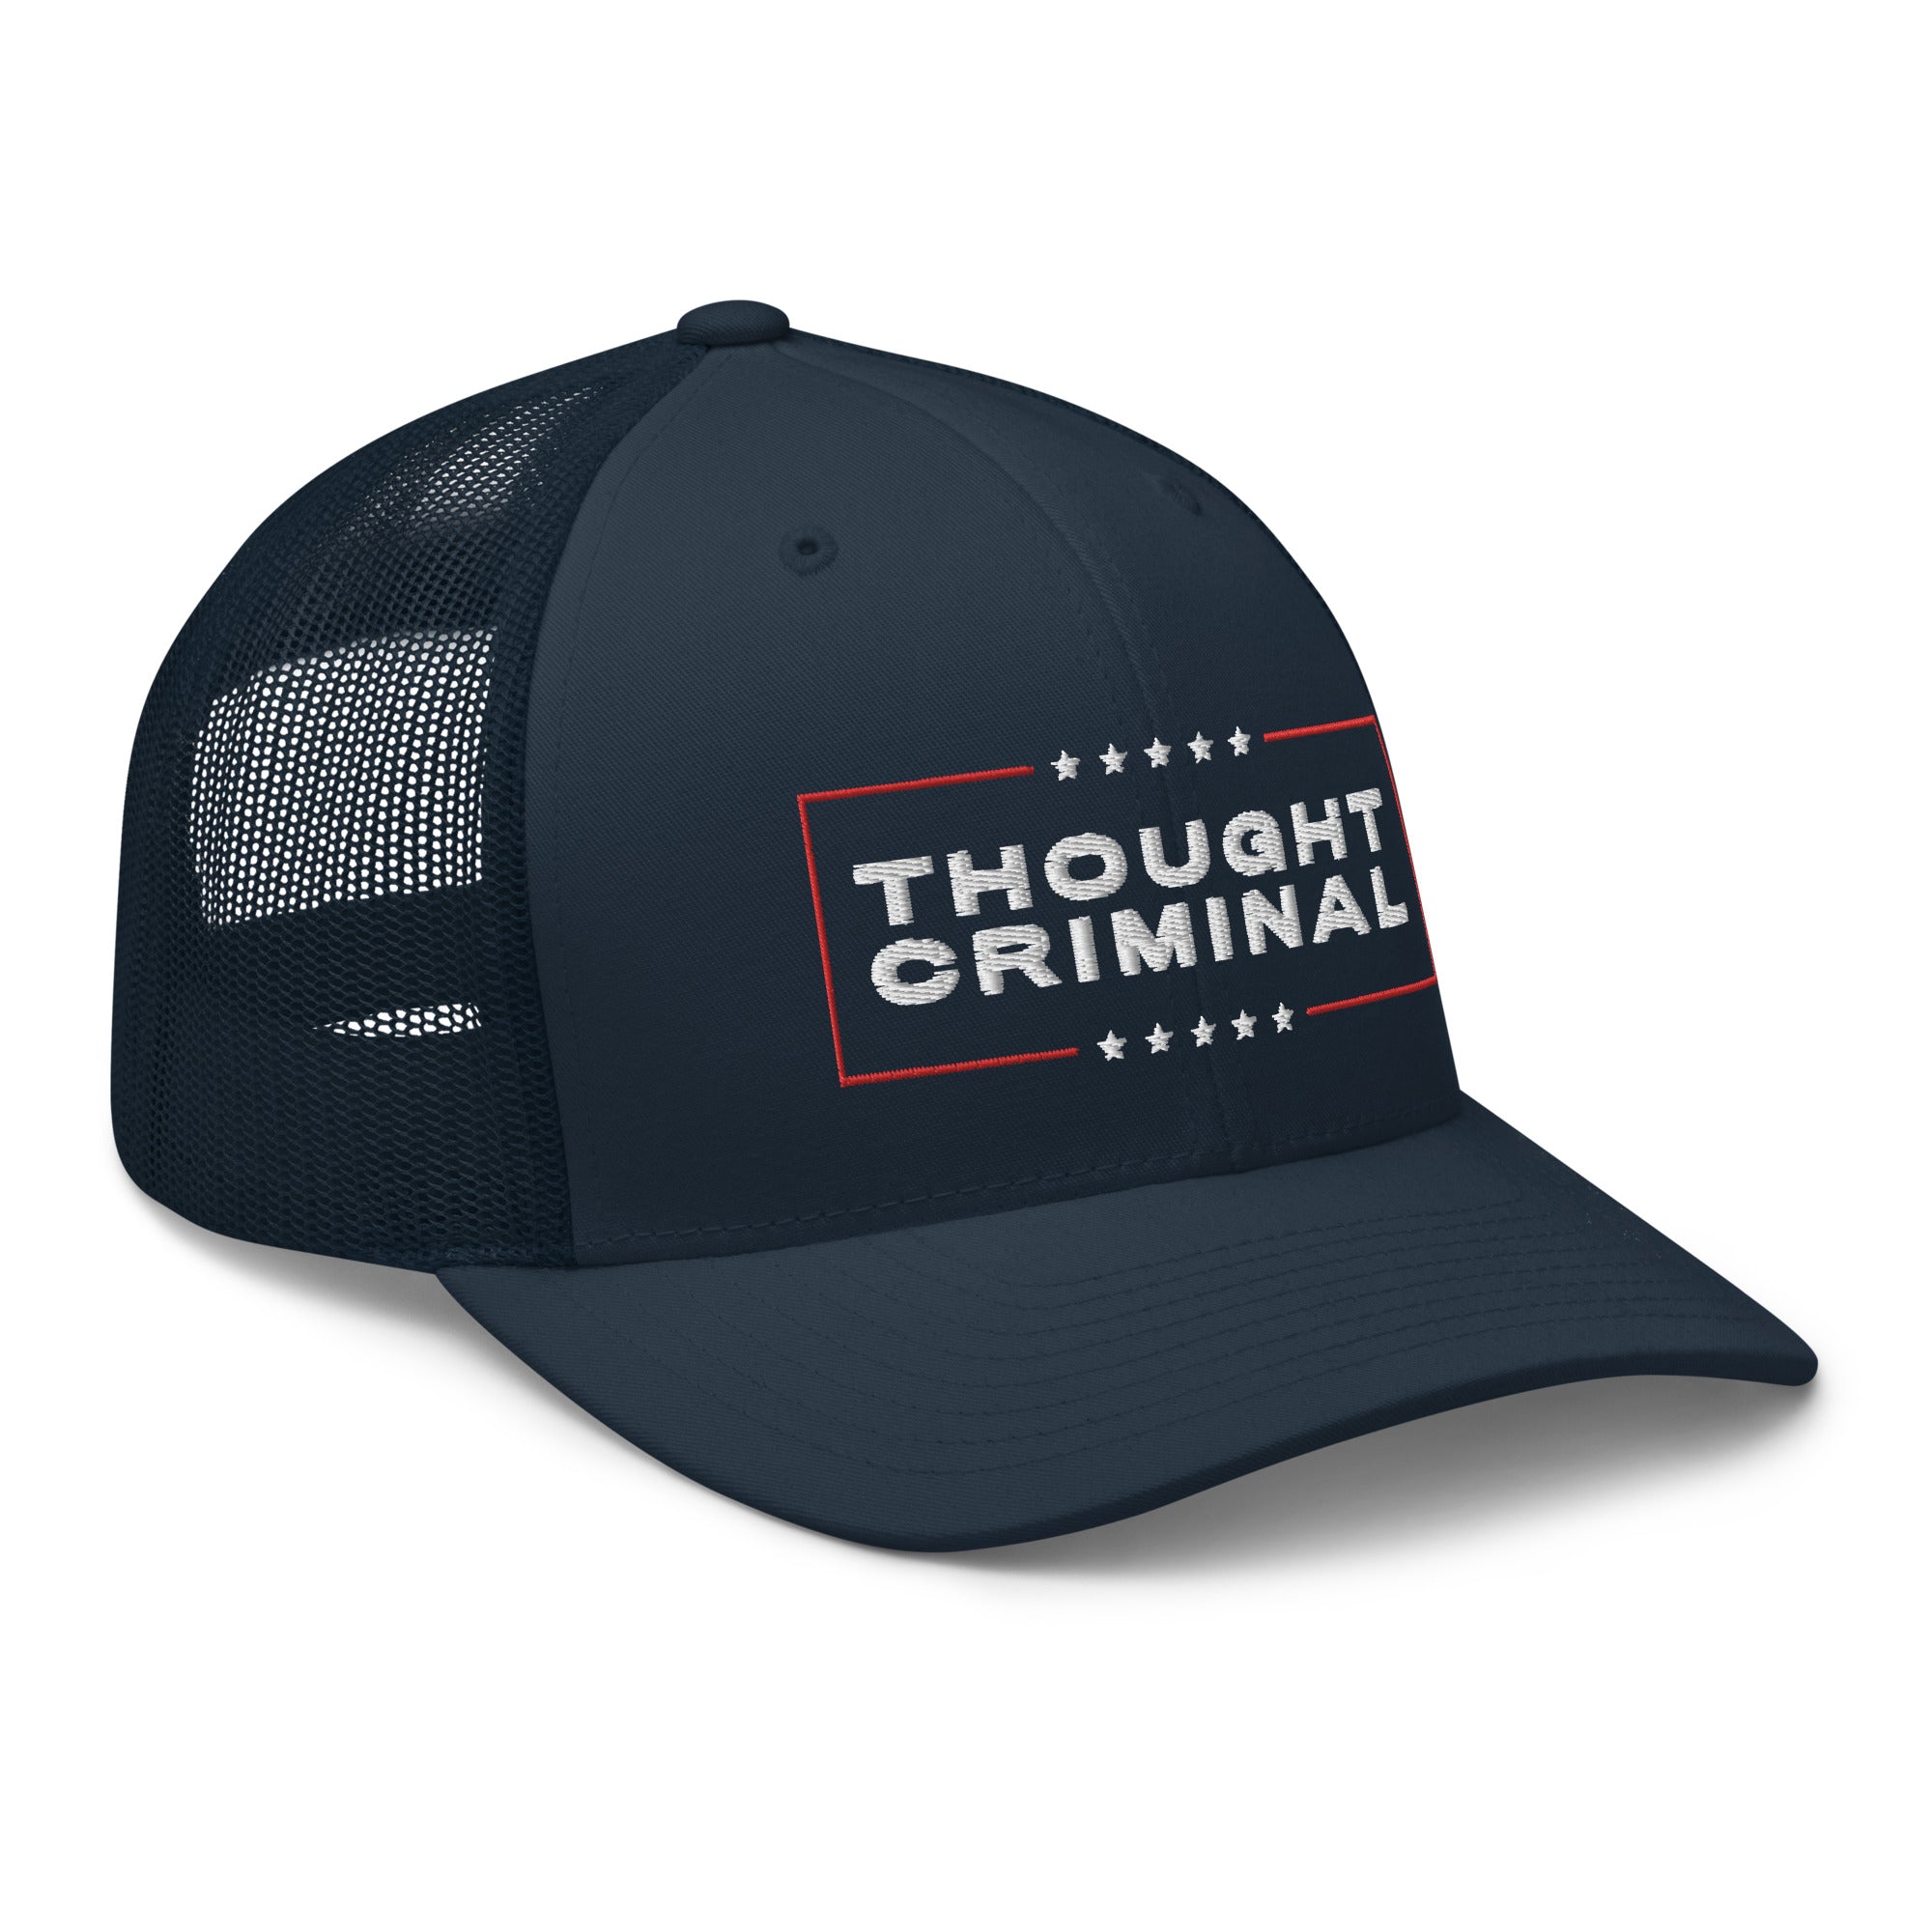 Thought Criminal Campaign Trucker Cap